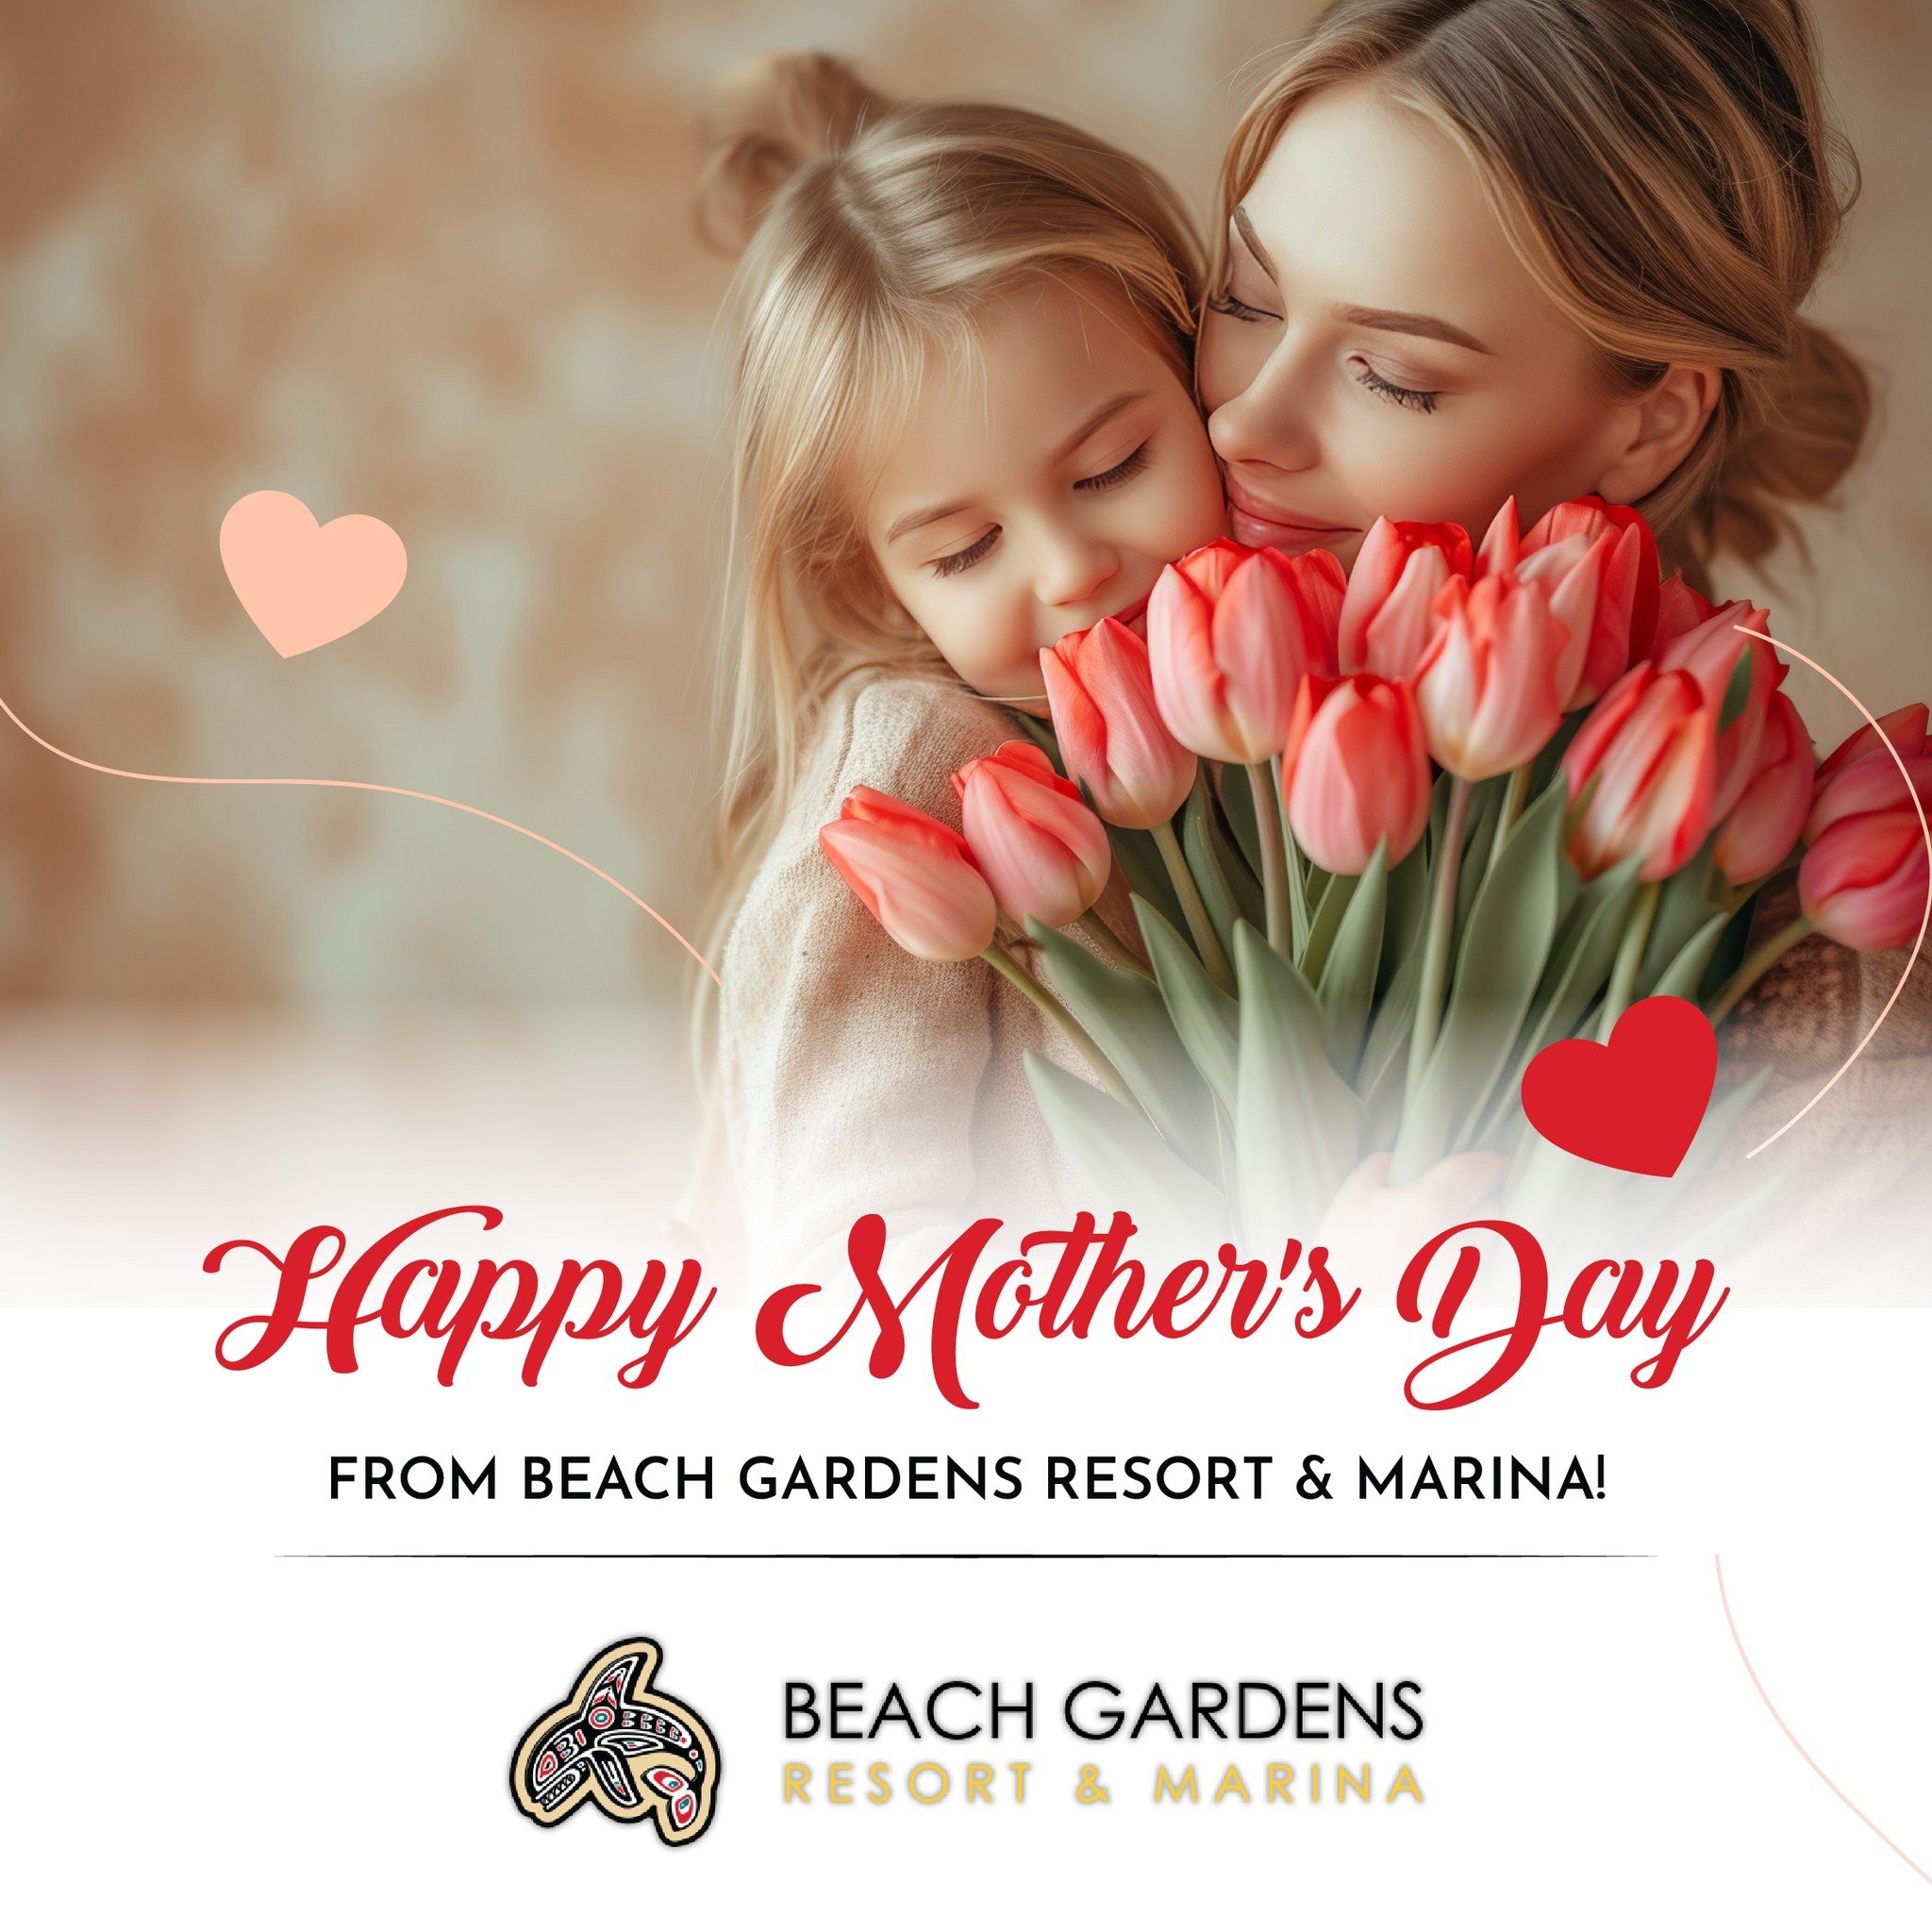 🌸 Happy Mother's Day from Beach Gardens Resort &amp; Marina! 🌼

To all the incredible moms out there, we want to wish you a day filled with love, joy, and cherished moments.

Today, we celebrate you and all that you do. Whether you're relaxing by t